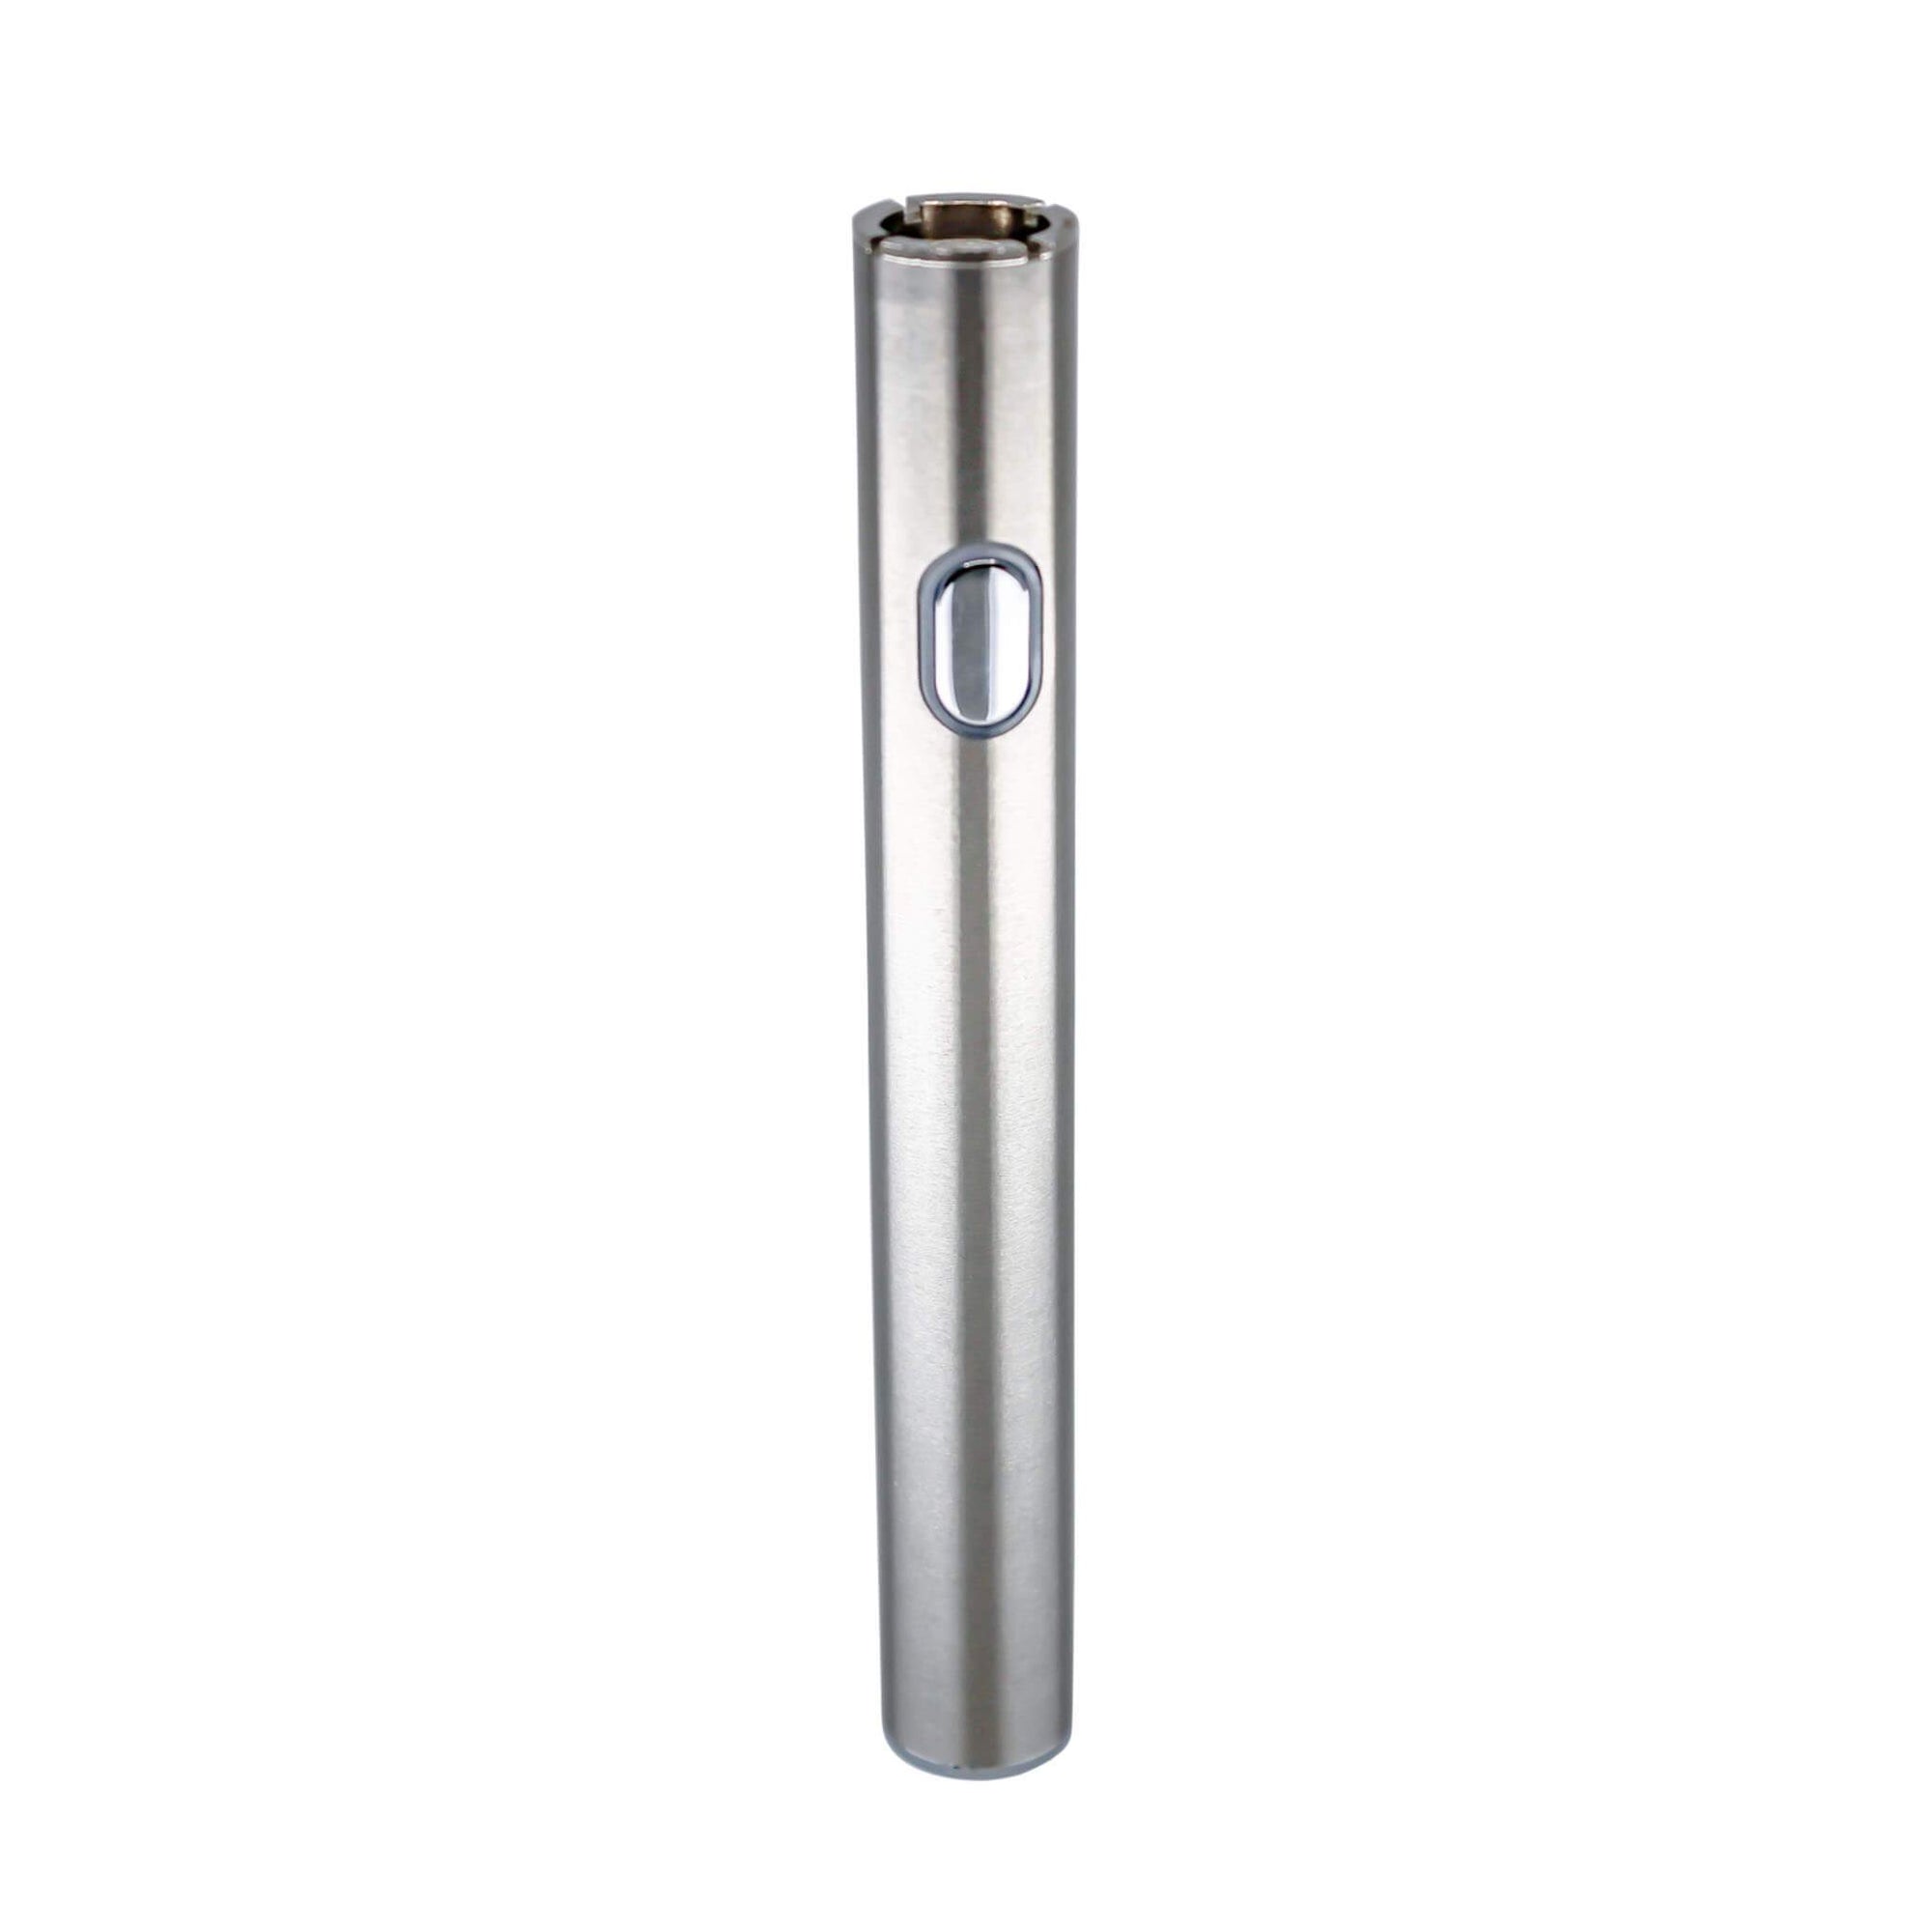 CCELL® M3B - Stainless Steel